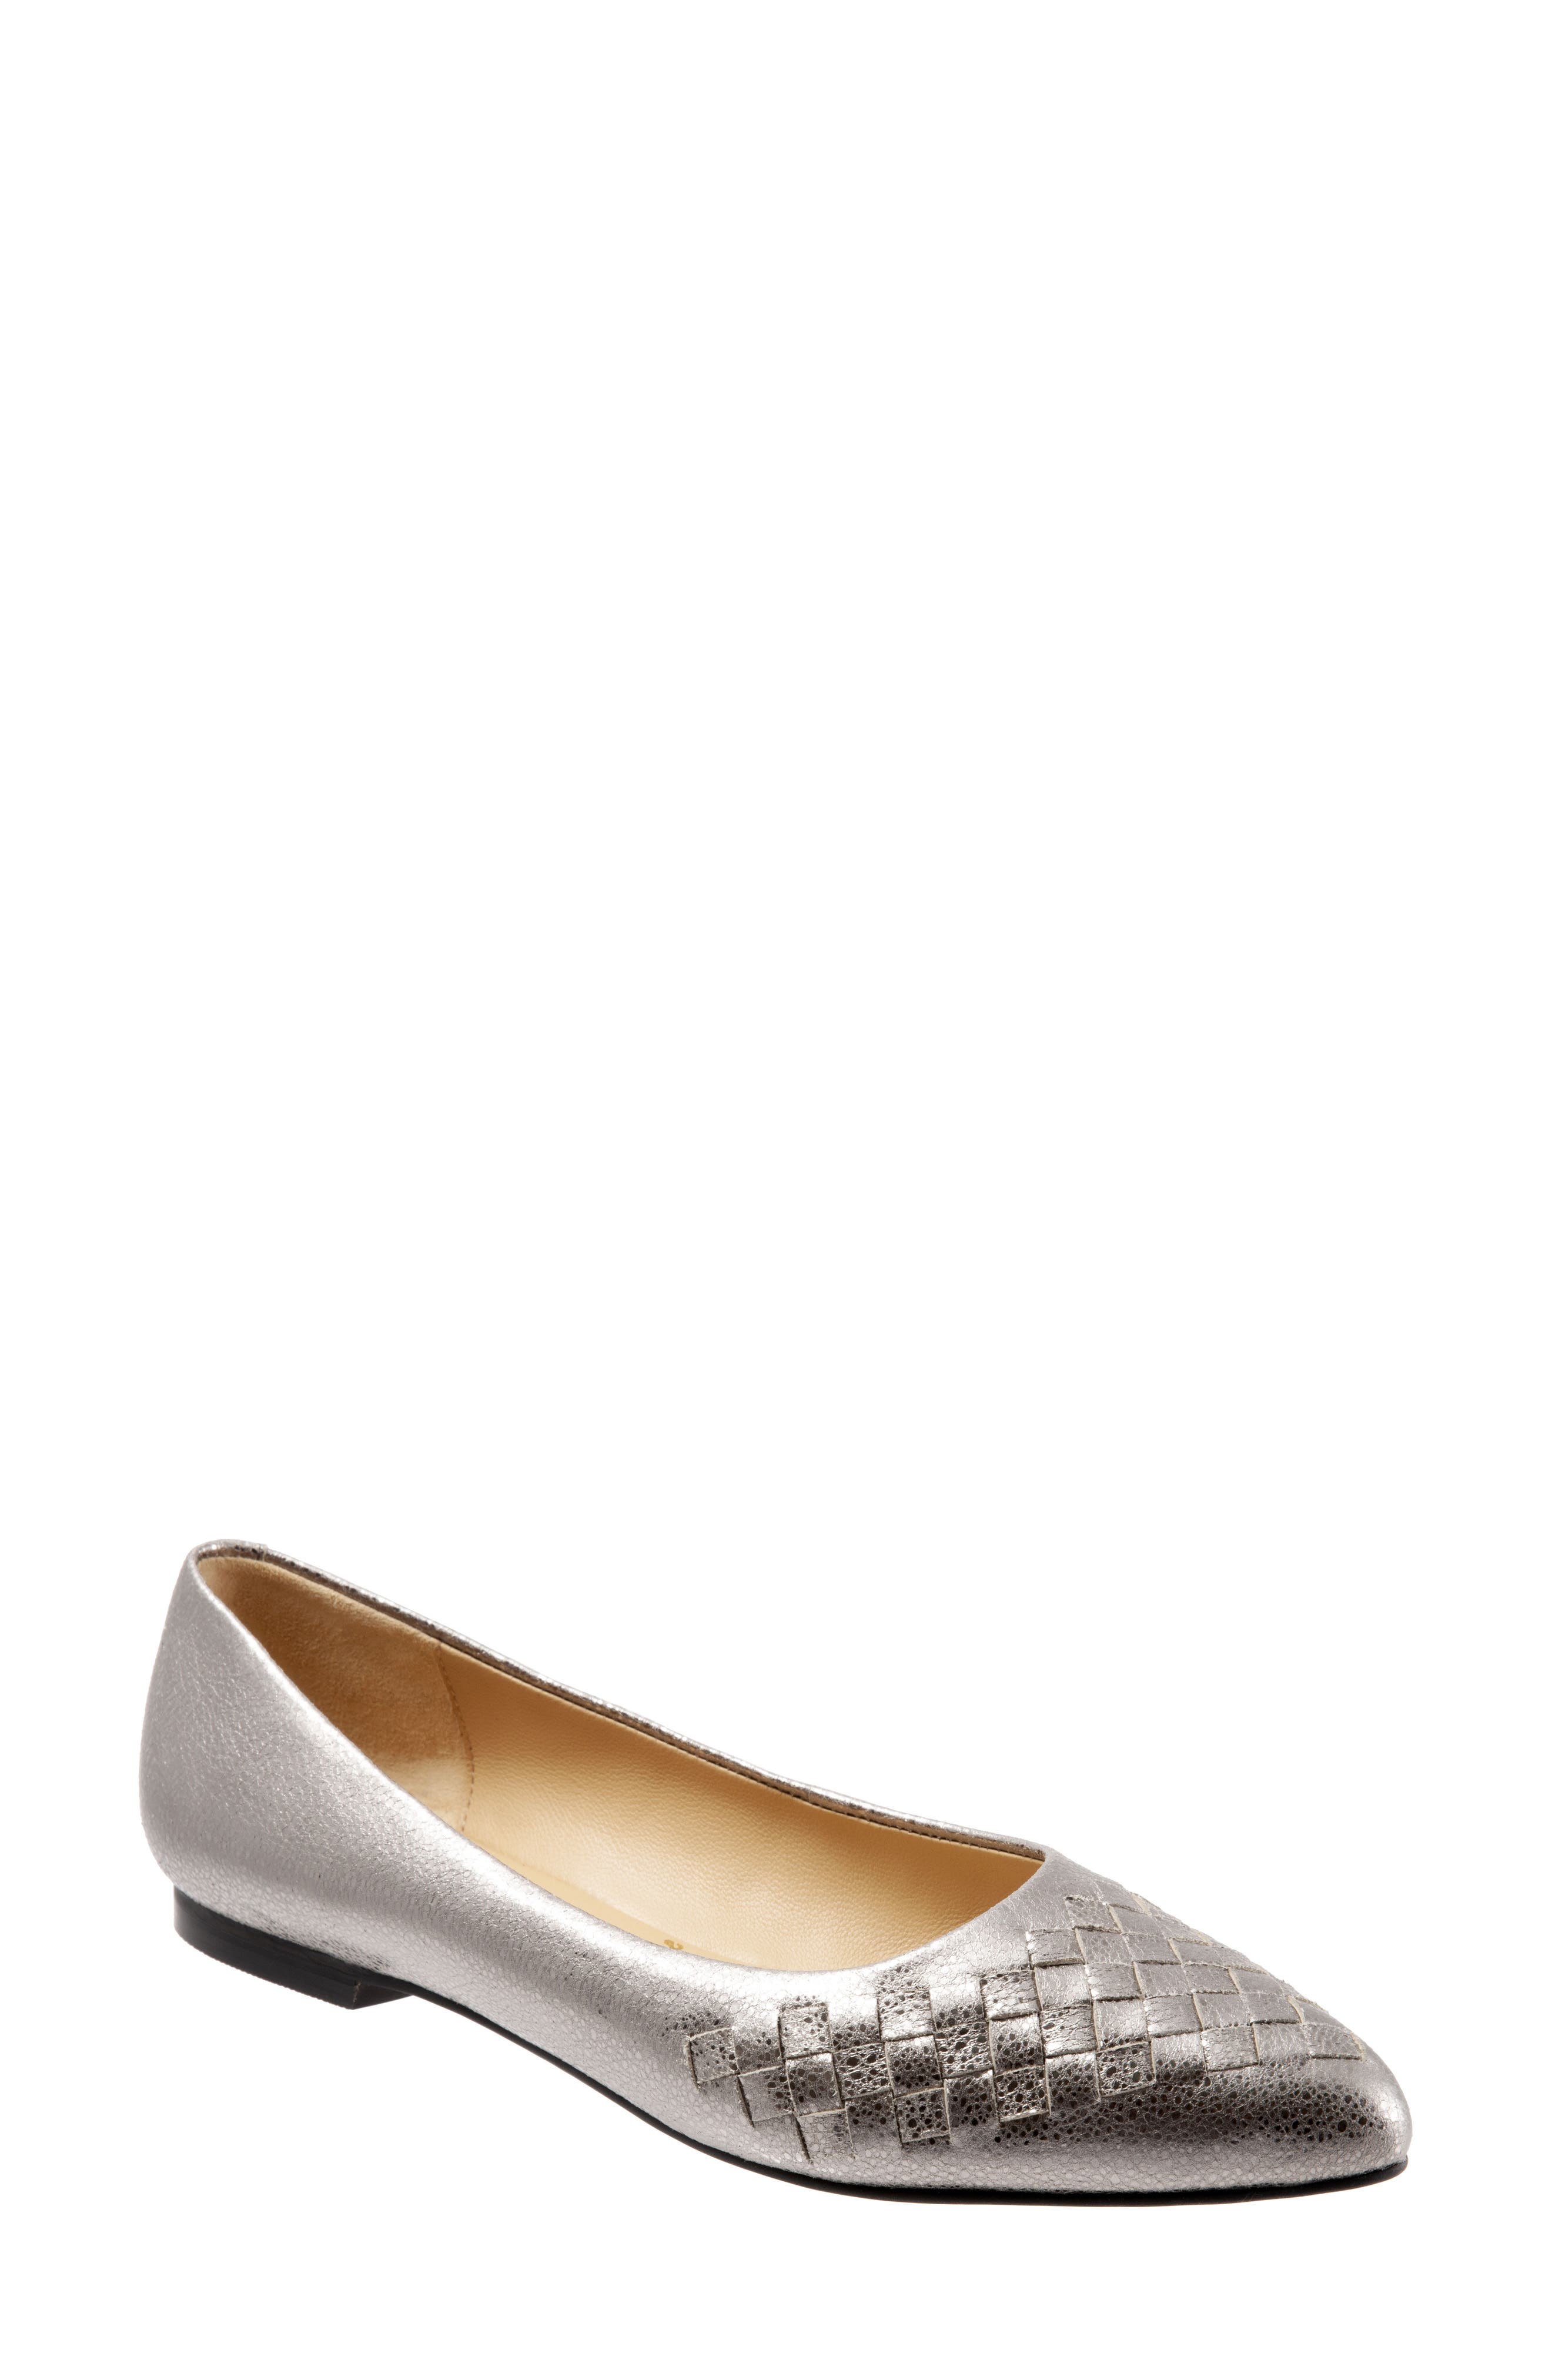 trotters estee pointed toe flat